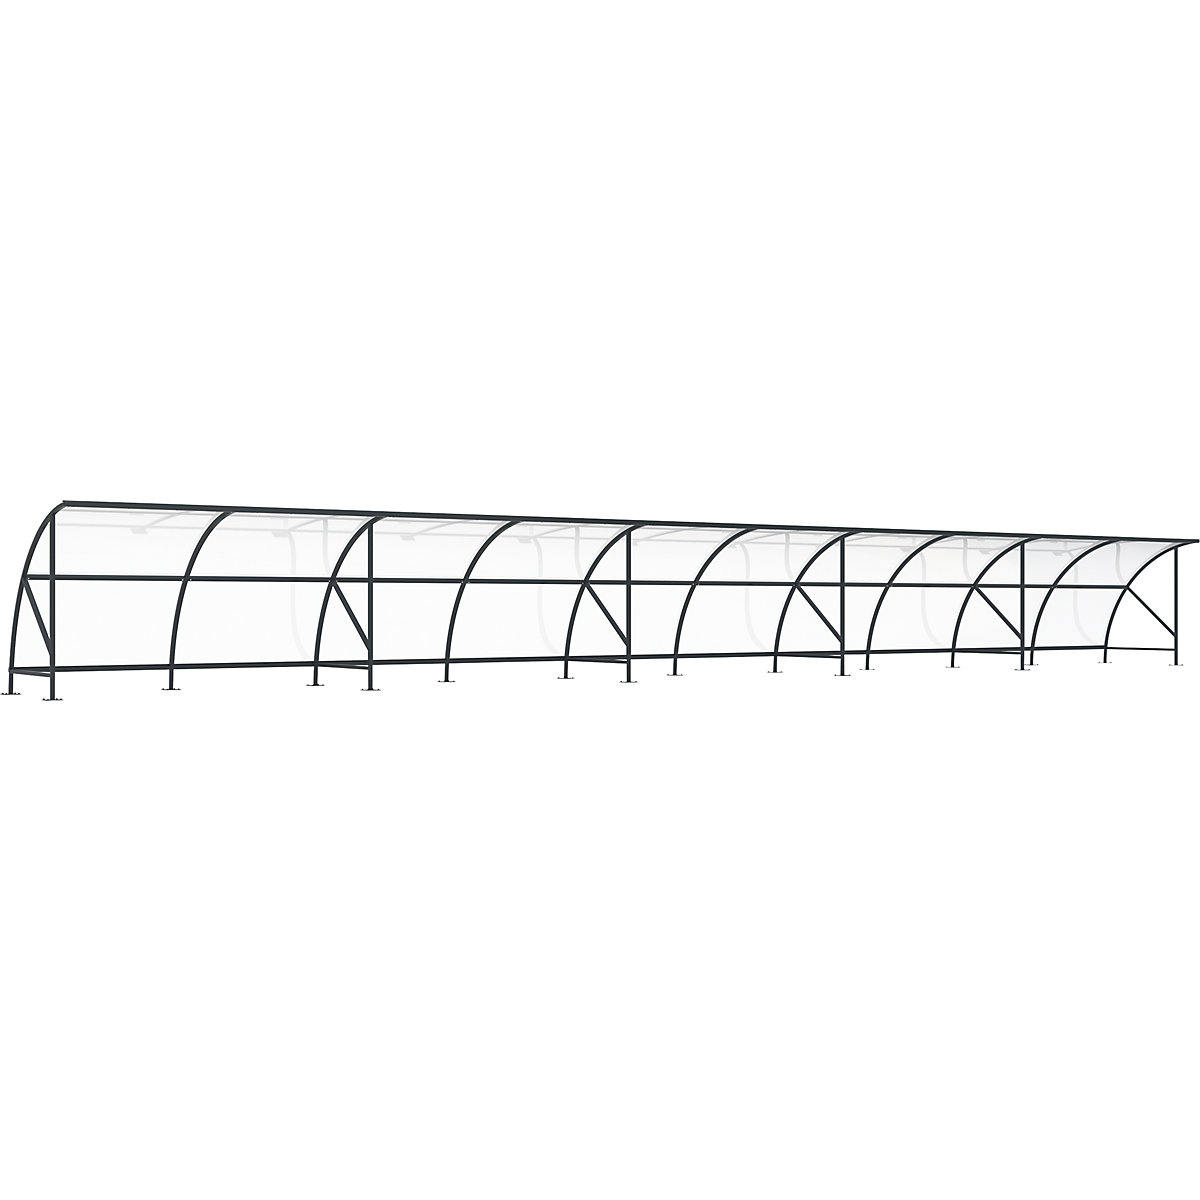 Bicycle shelter, made of polycarbonate, WxD 20550 x 2100 mm, charcoal RAL 7016-7